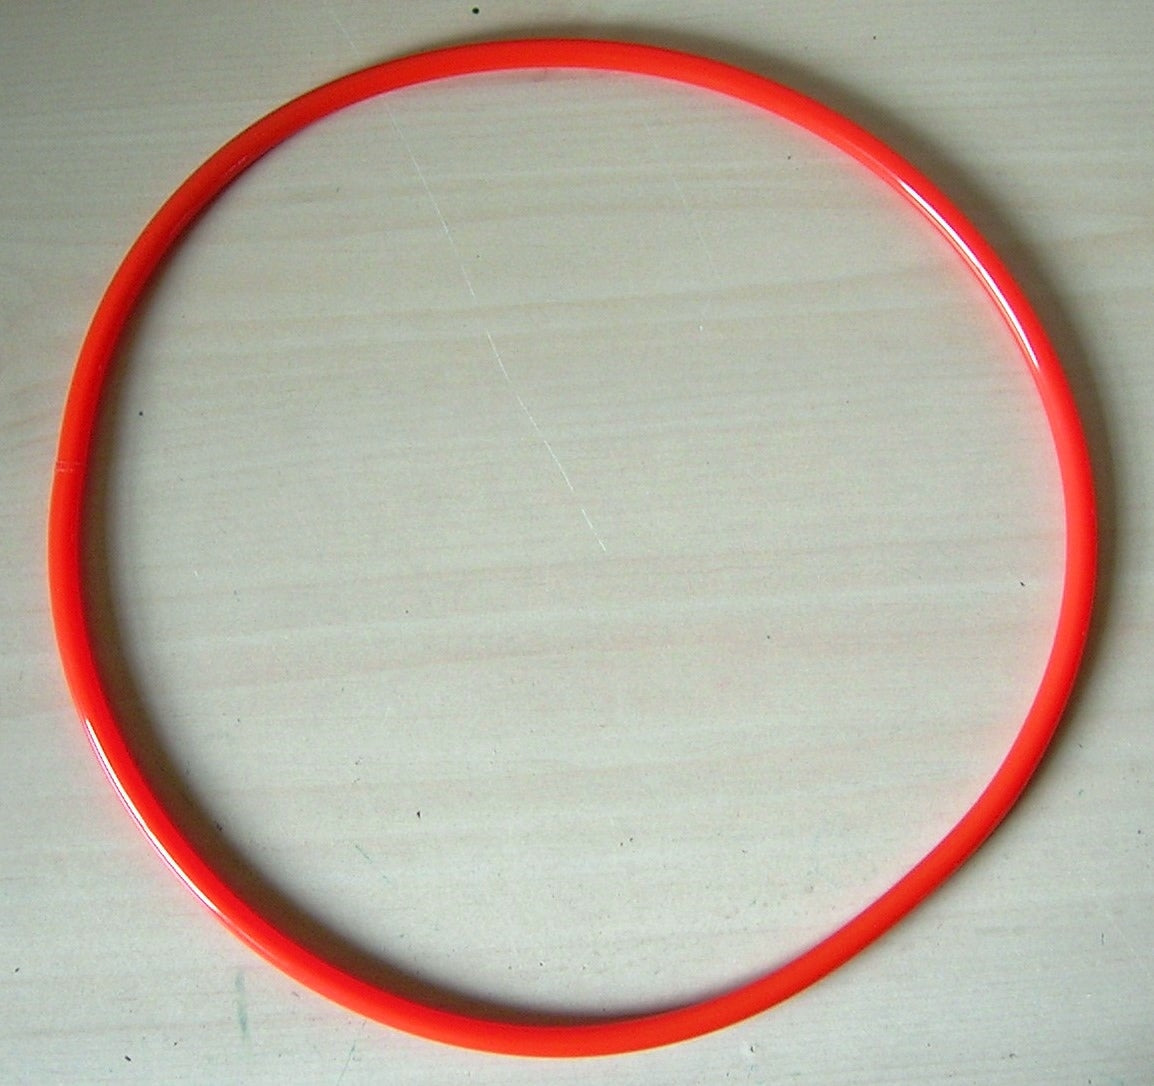 1/4" ROUND DRIVE BELT FOR TRADESMAN T7060 BAND SAW